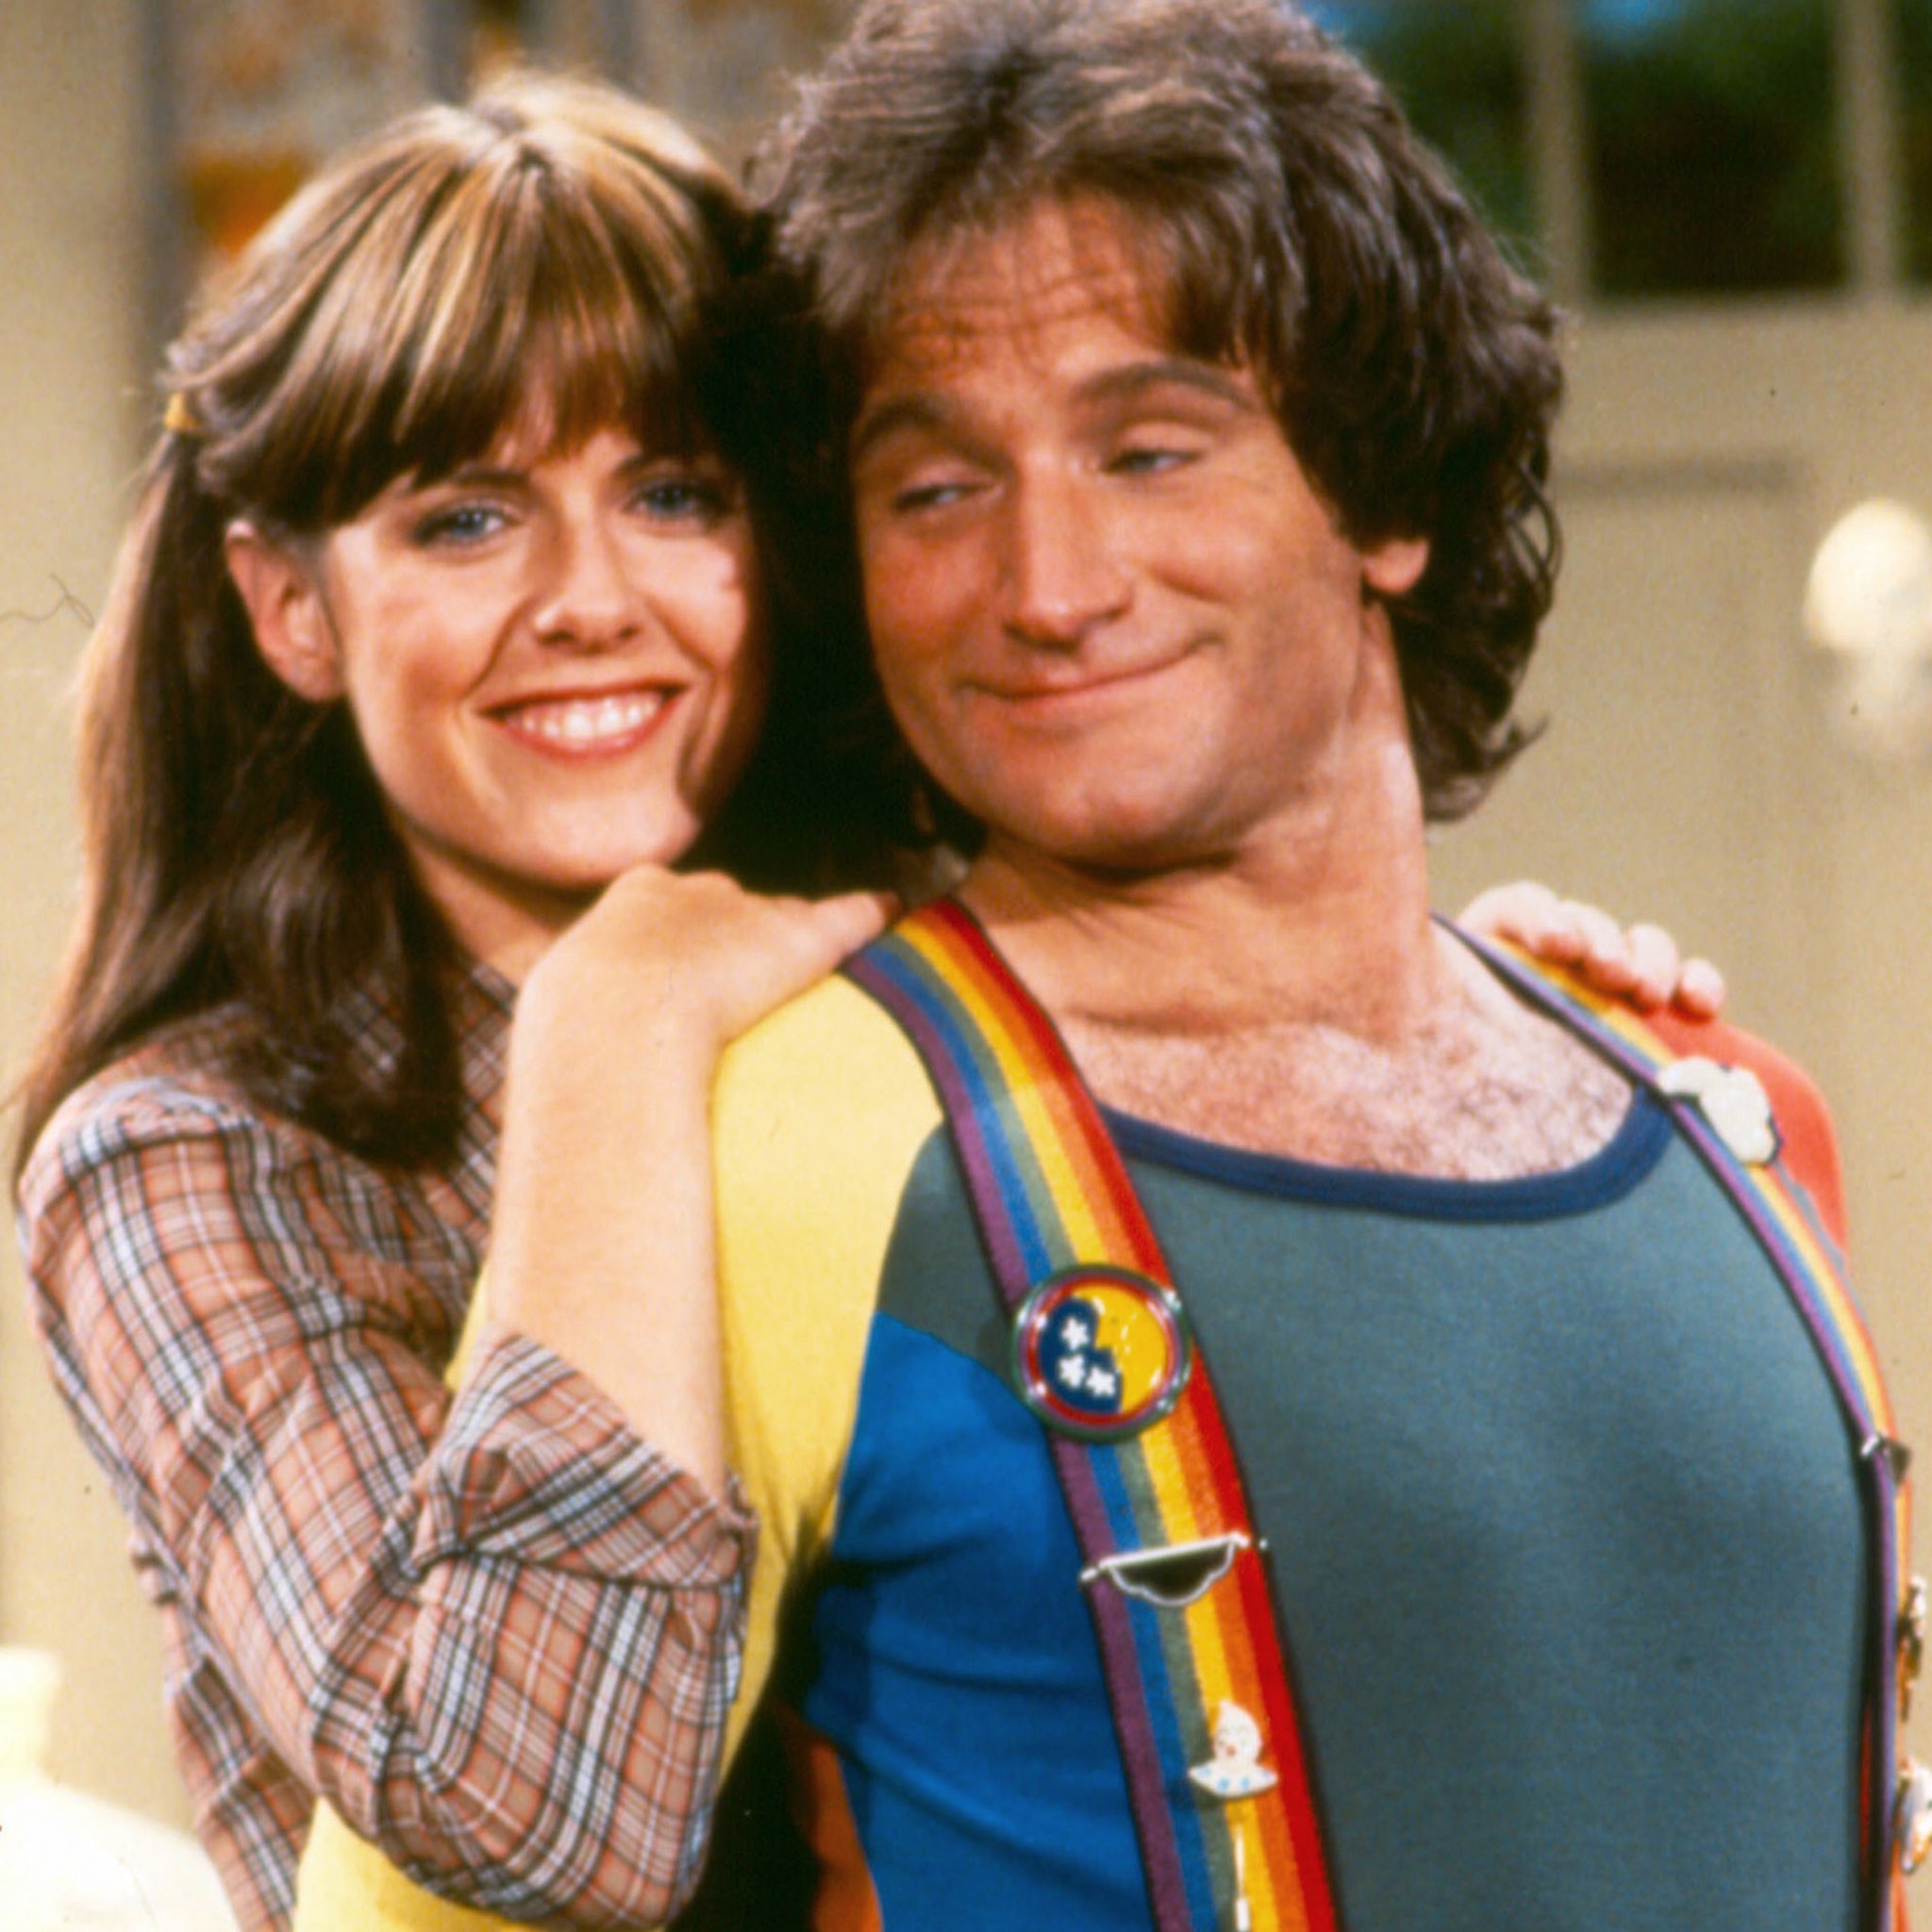 Robin Williams Mork and Mindy Co-Star